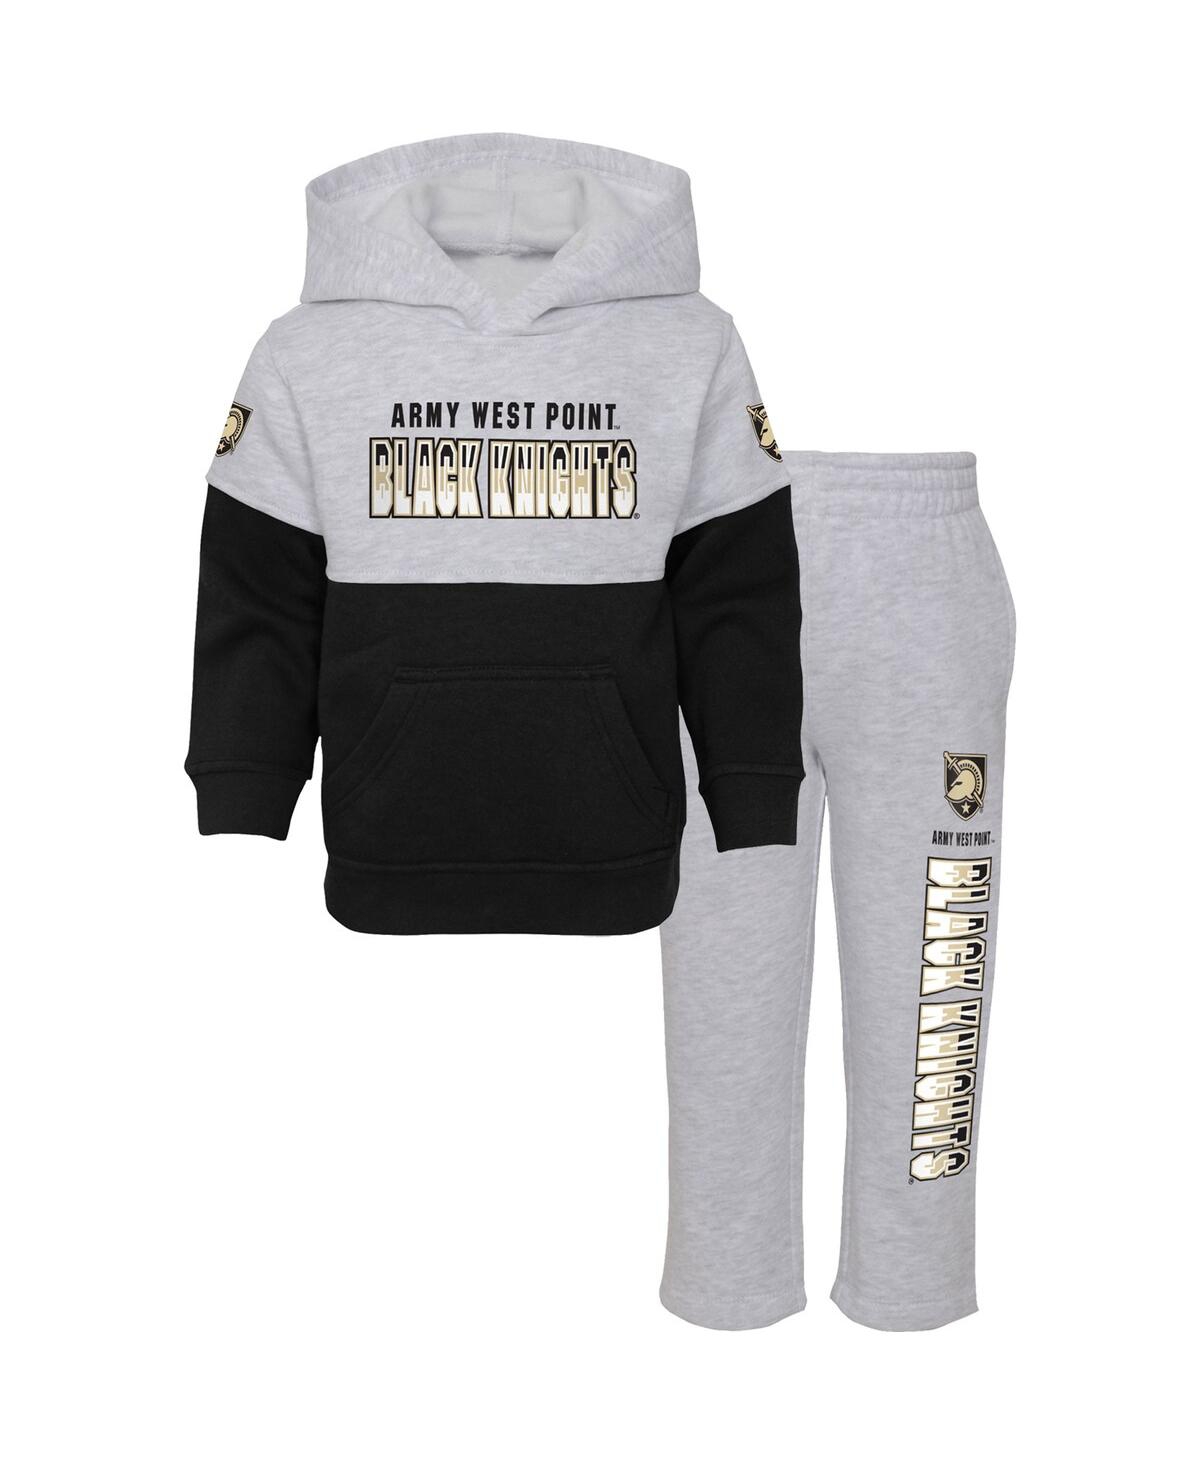 Outerstuff Babies' Toddler Boys And Girls Heather Gray, Black Army Black Knights Playmaker Pullover Hoodie And Pants Se In Heather Gray,black